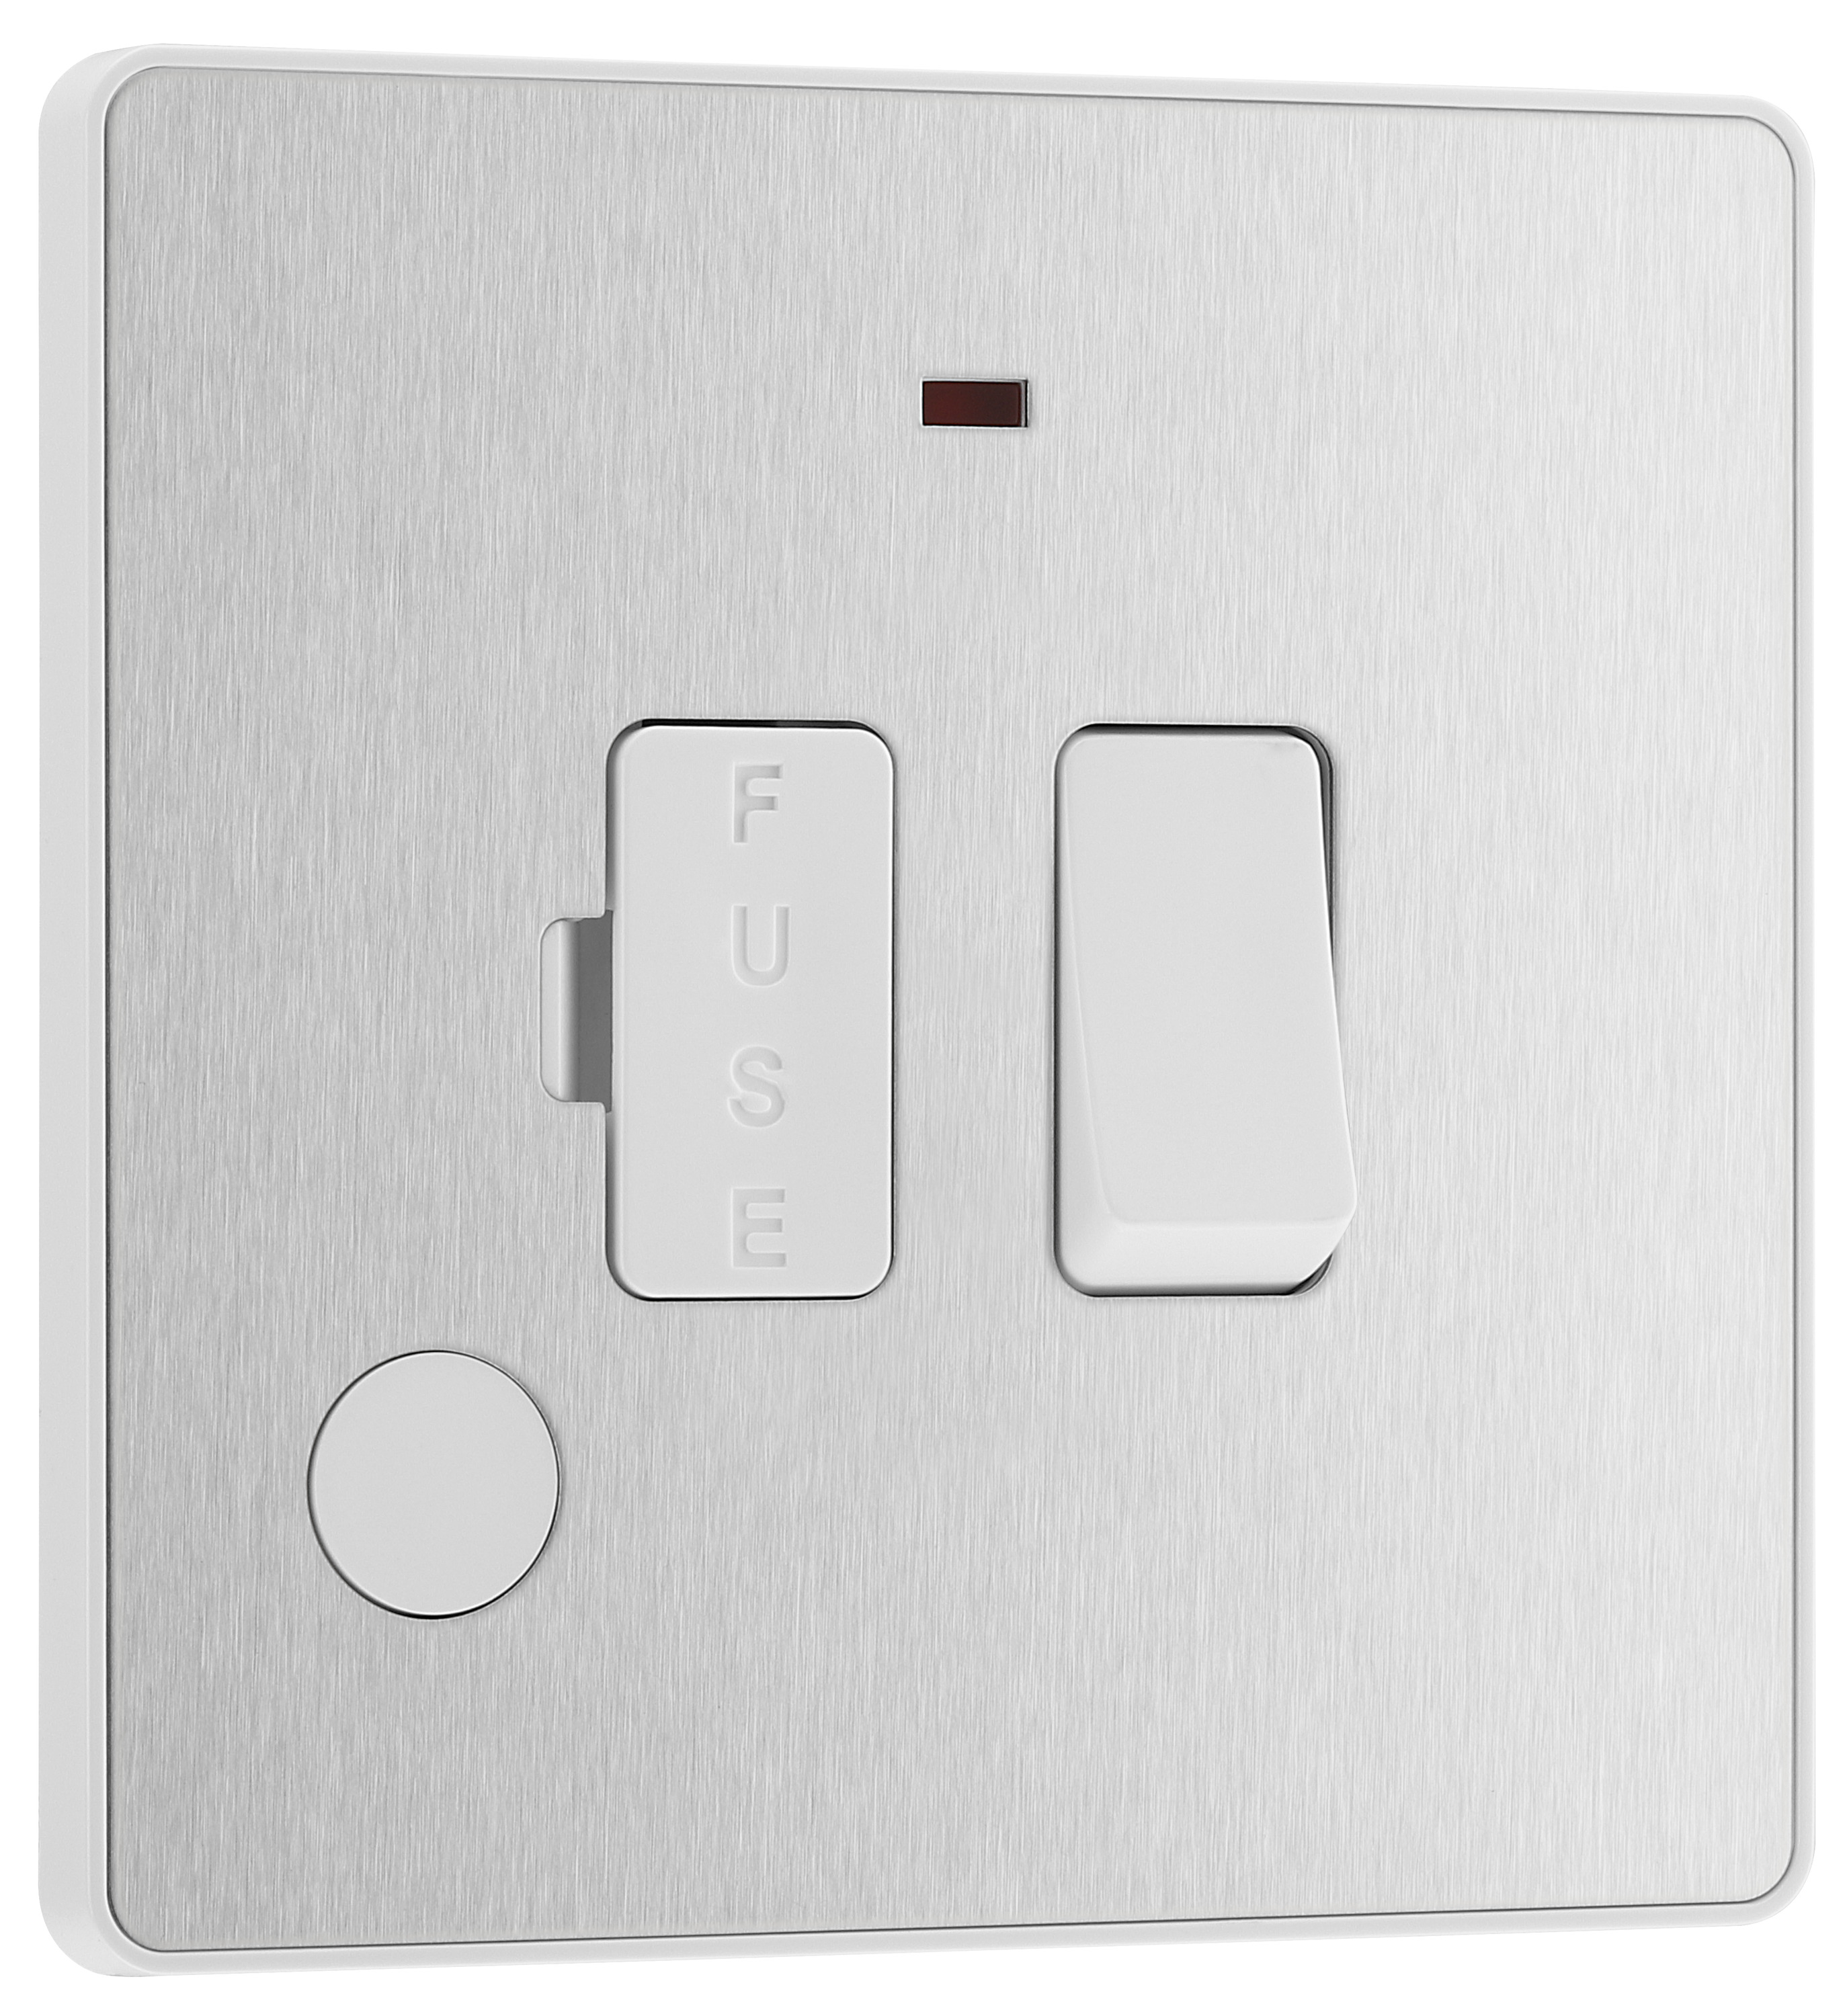 Image of BG Evolve Brushed Steel 13A Switched Fused Connection Unit with Power Led Indicator & Flex Outlet